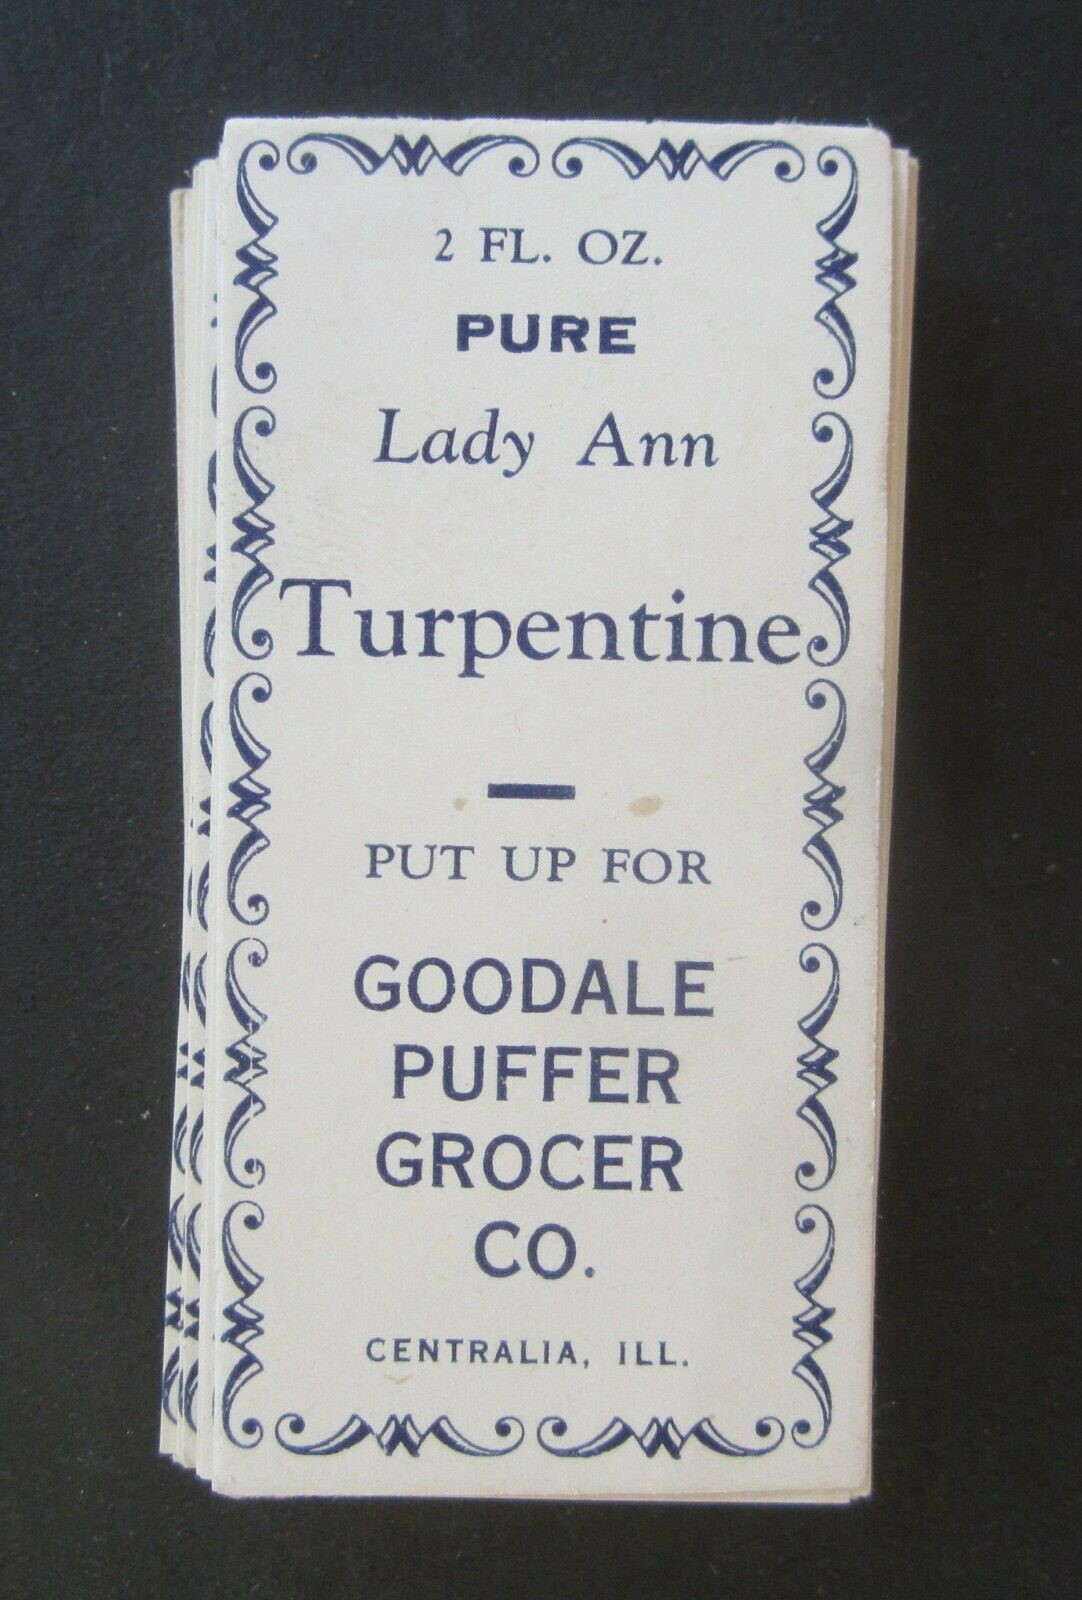 Lot of 50 Old Vintage - Lady Ann TURPENTINE LAB...